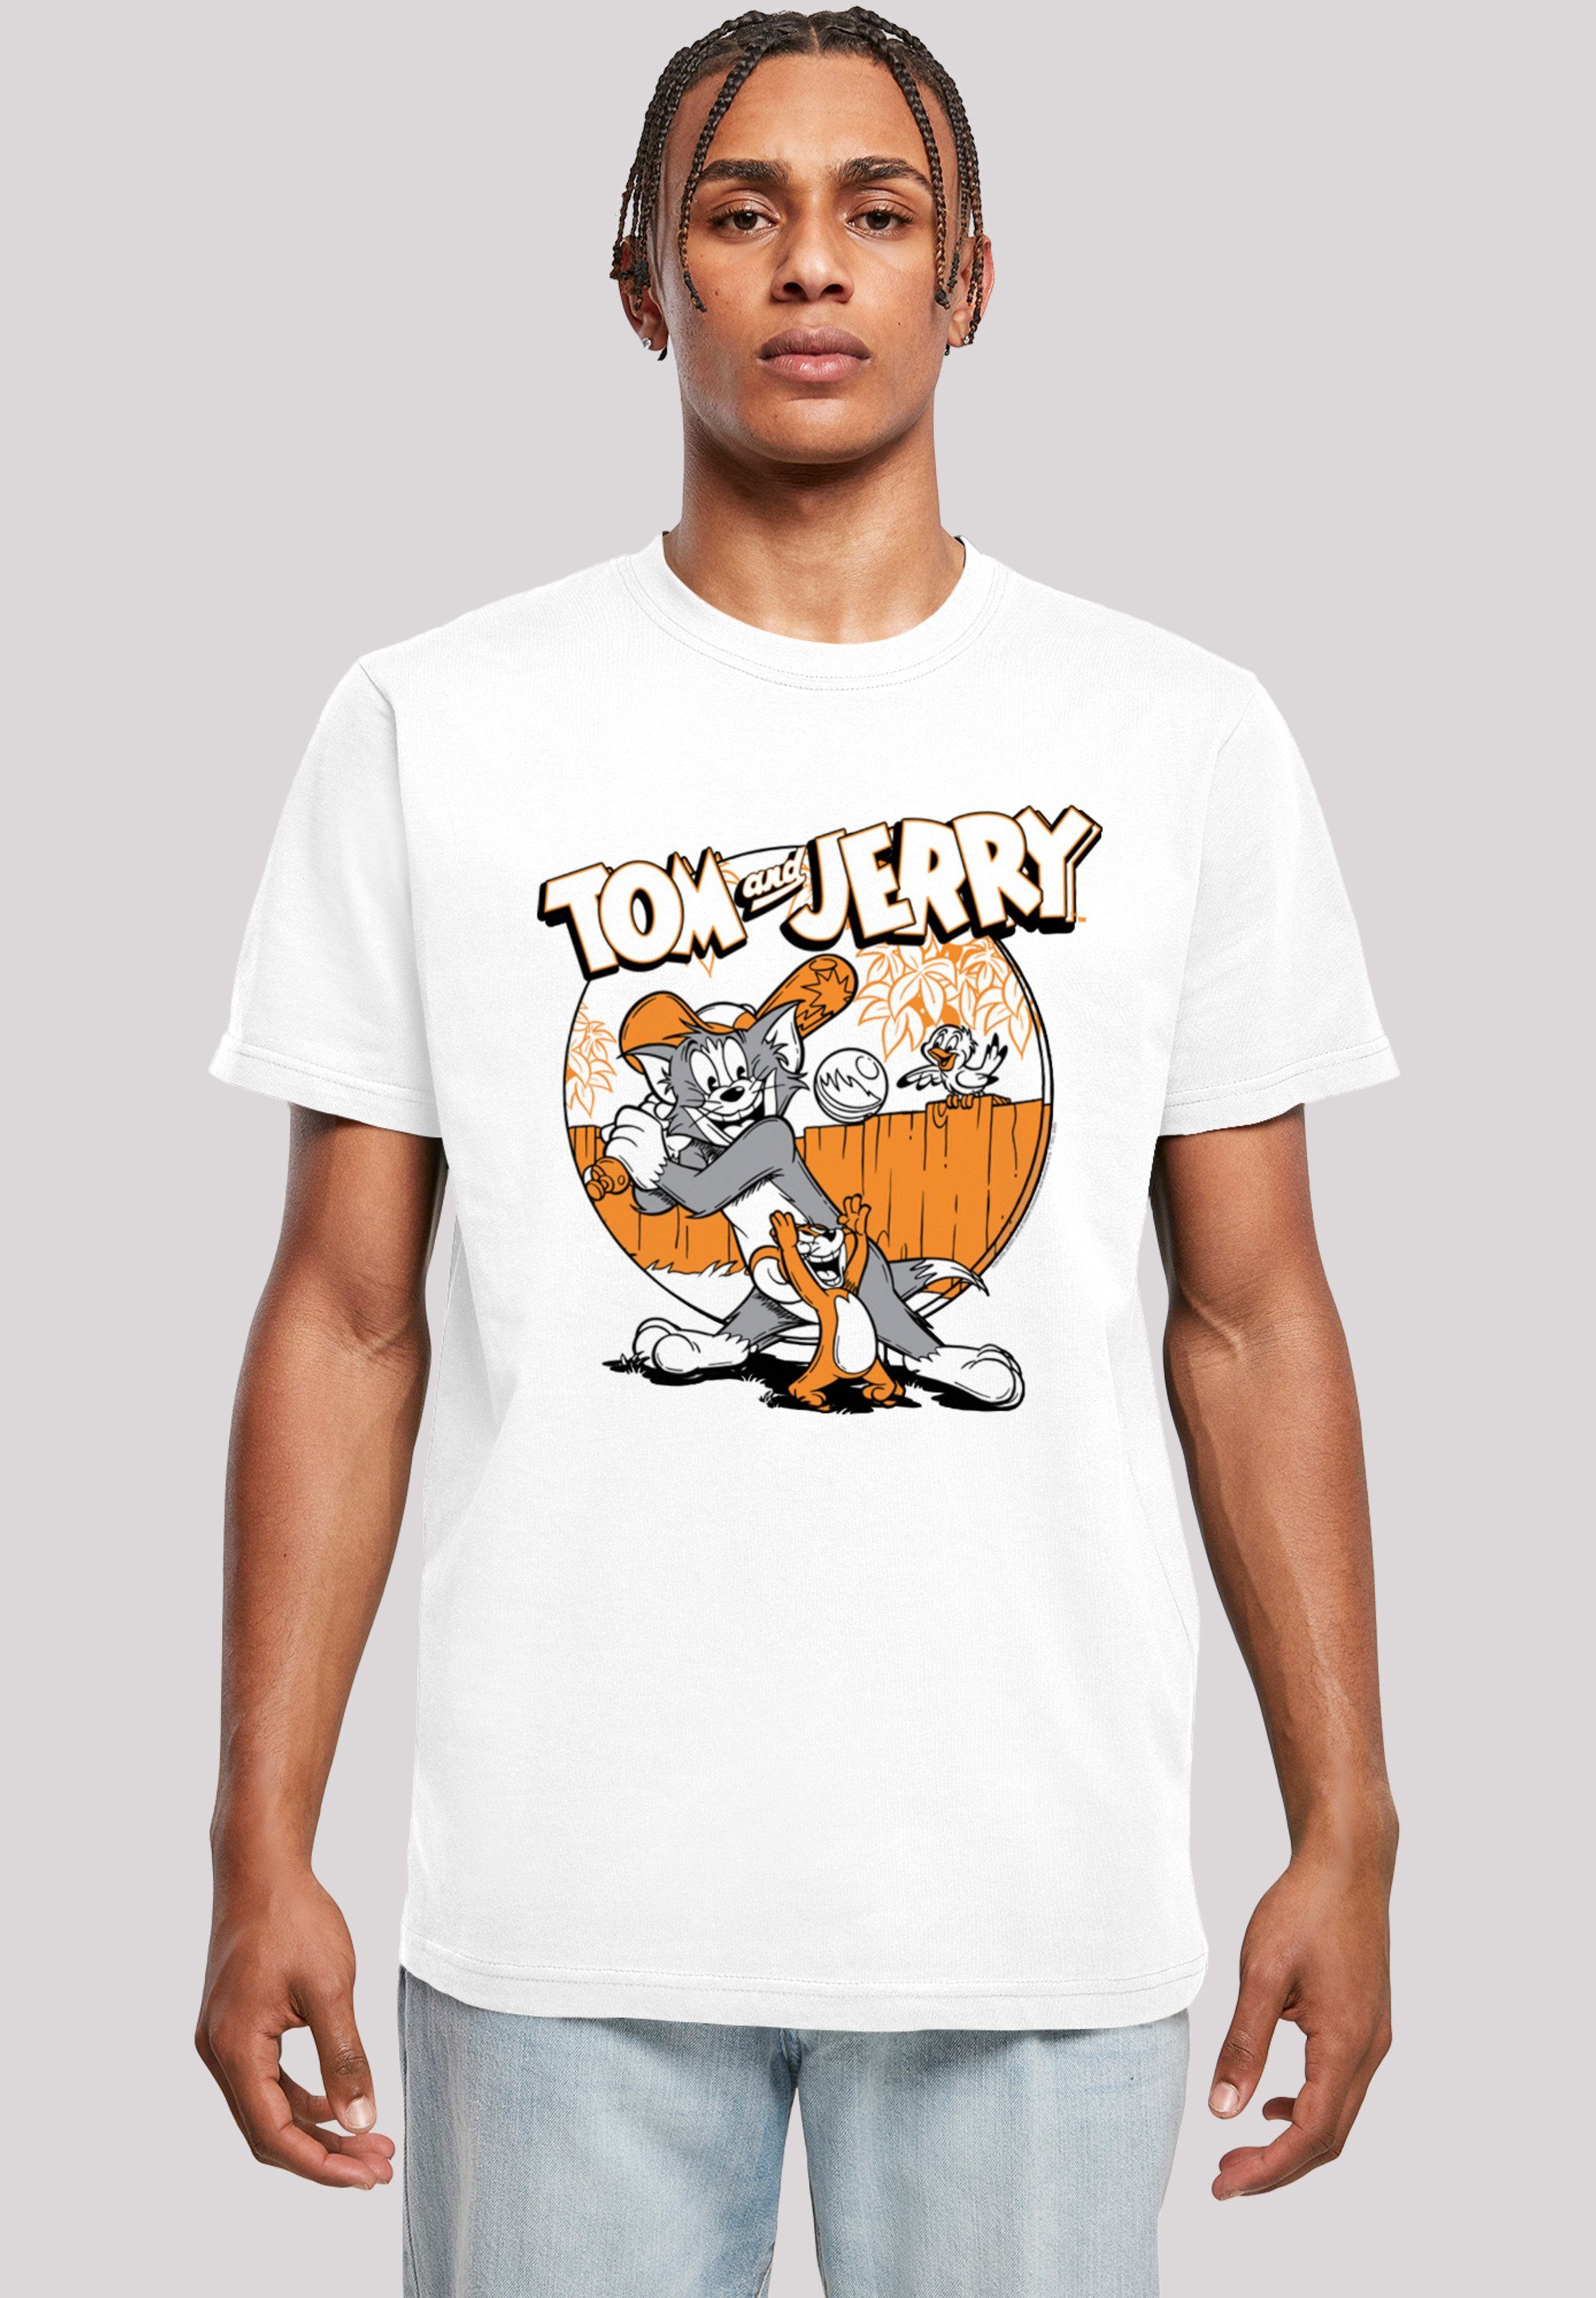 Tom Jerry Print, And Offiziell Play Serie lizenziertes T-Shirt and Baseball T-Shirt Tom TV Jerry F4NT4STIC